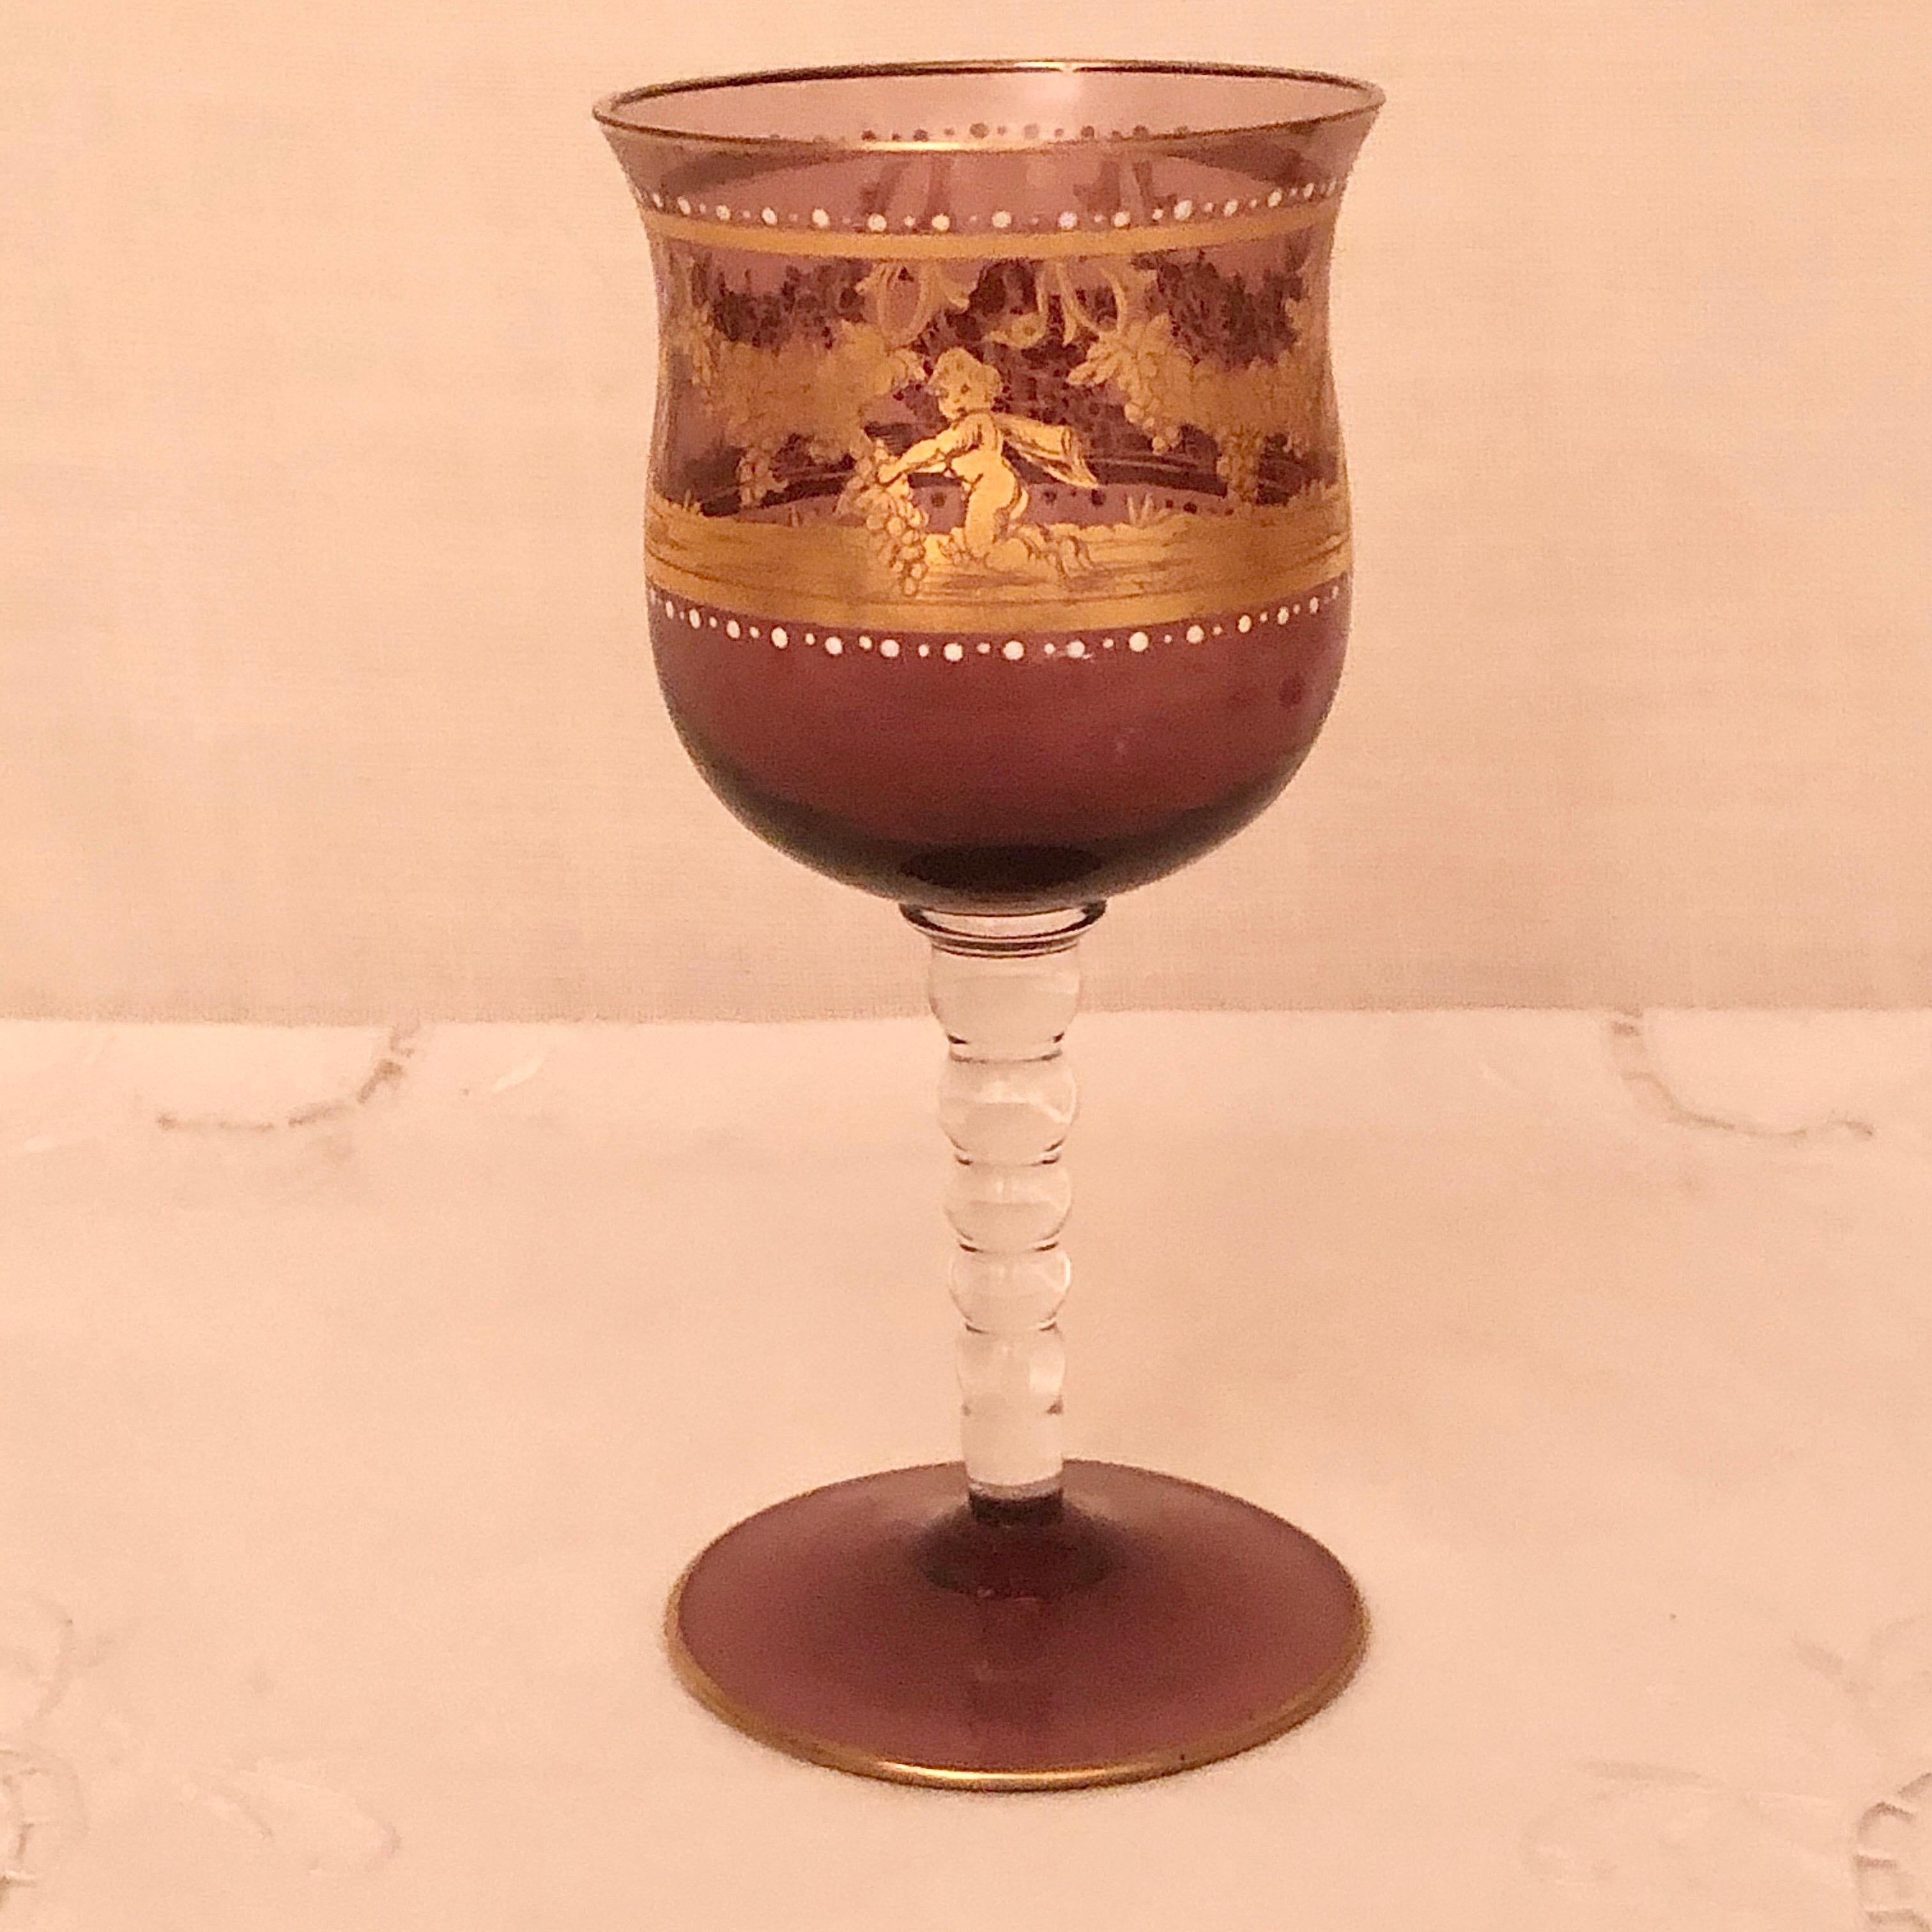 We are offering you this set of Salviati amethyst stemware decorated with gold cherubs picking grapes off of grape garlands with white enamel jeweling. This set would be a stunning way to serve your vintage wine or champagne. It would be an